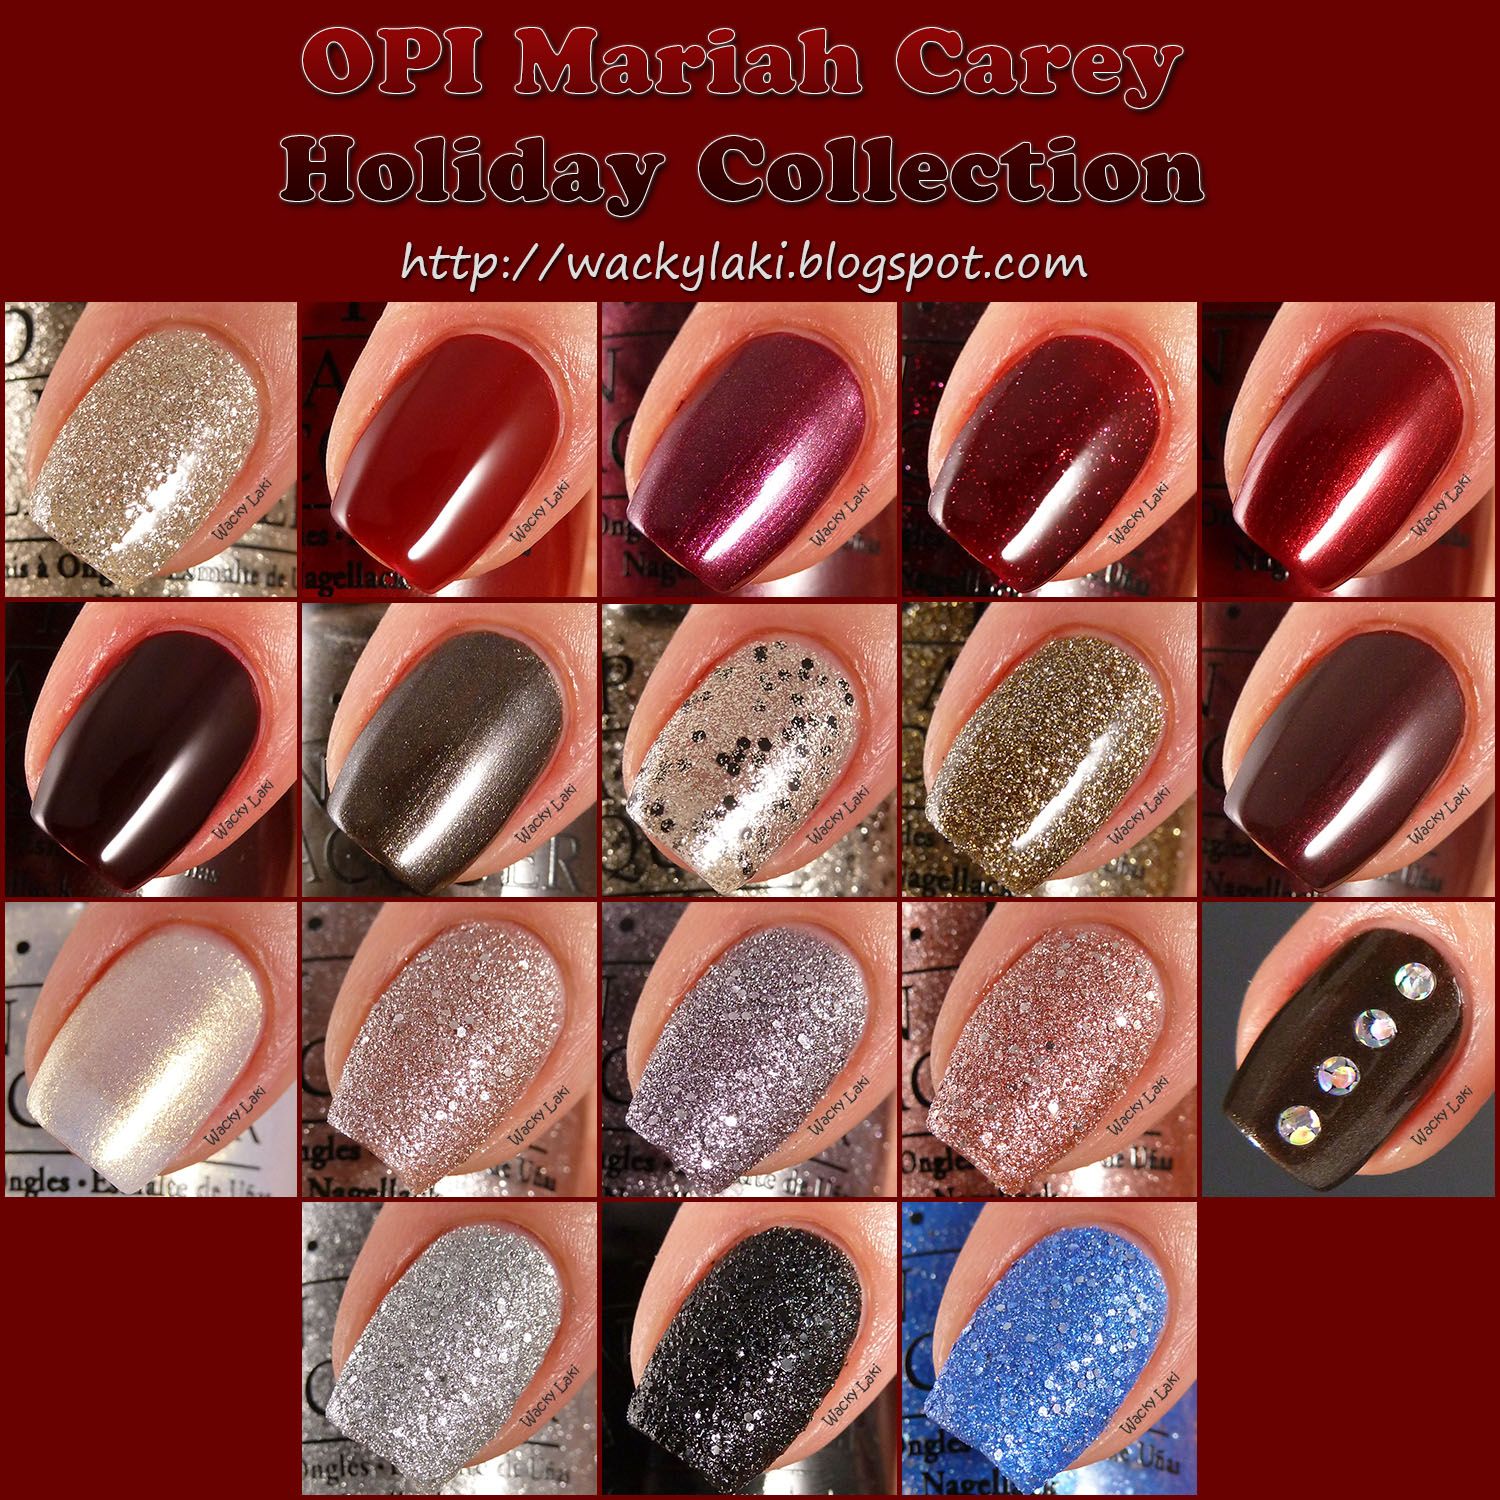 Complete Opi Mariah Carey Holiday Collection Hair Nails Make Up Manicures Designs Cool Nail Designs